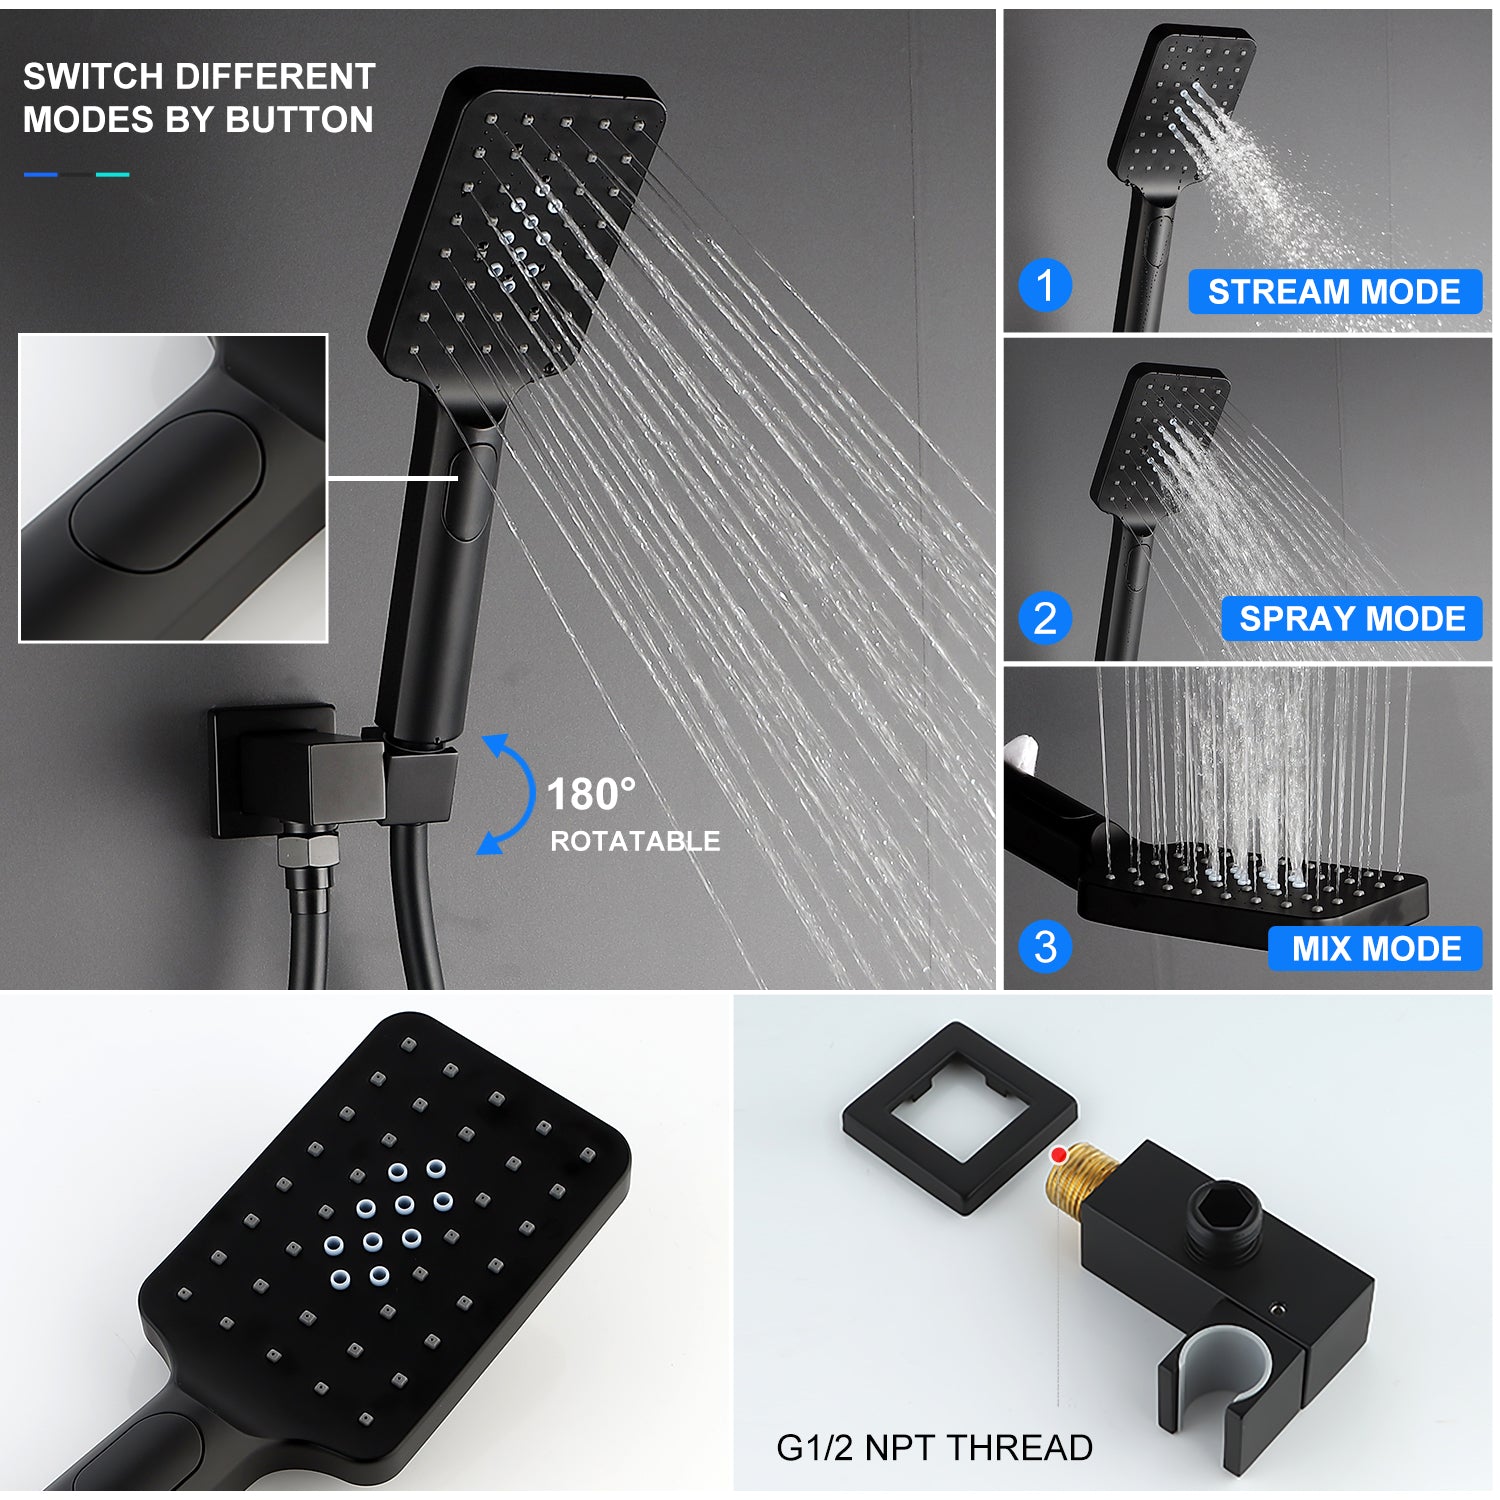 【Rainlex RX97202-12】12" Shower Haead Dual Functions Wall-Mount  Pressure Balance Square Shower Faucet(Rough-in Valve Included)